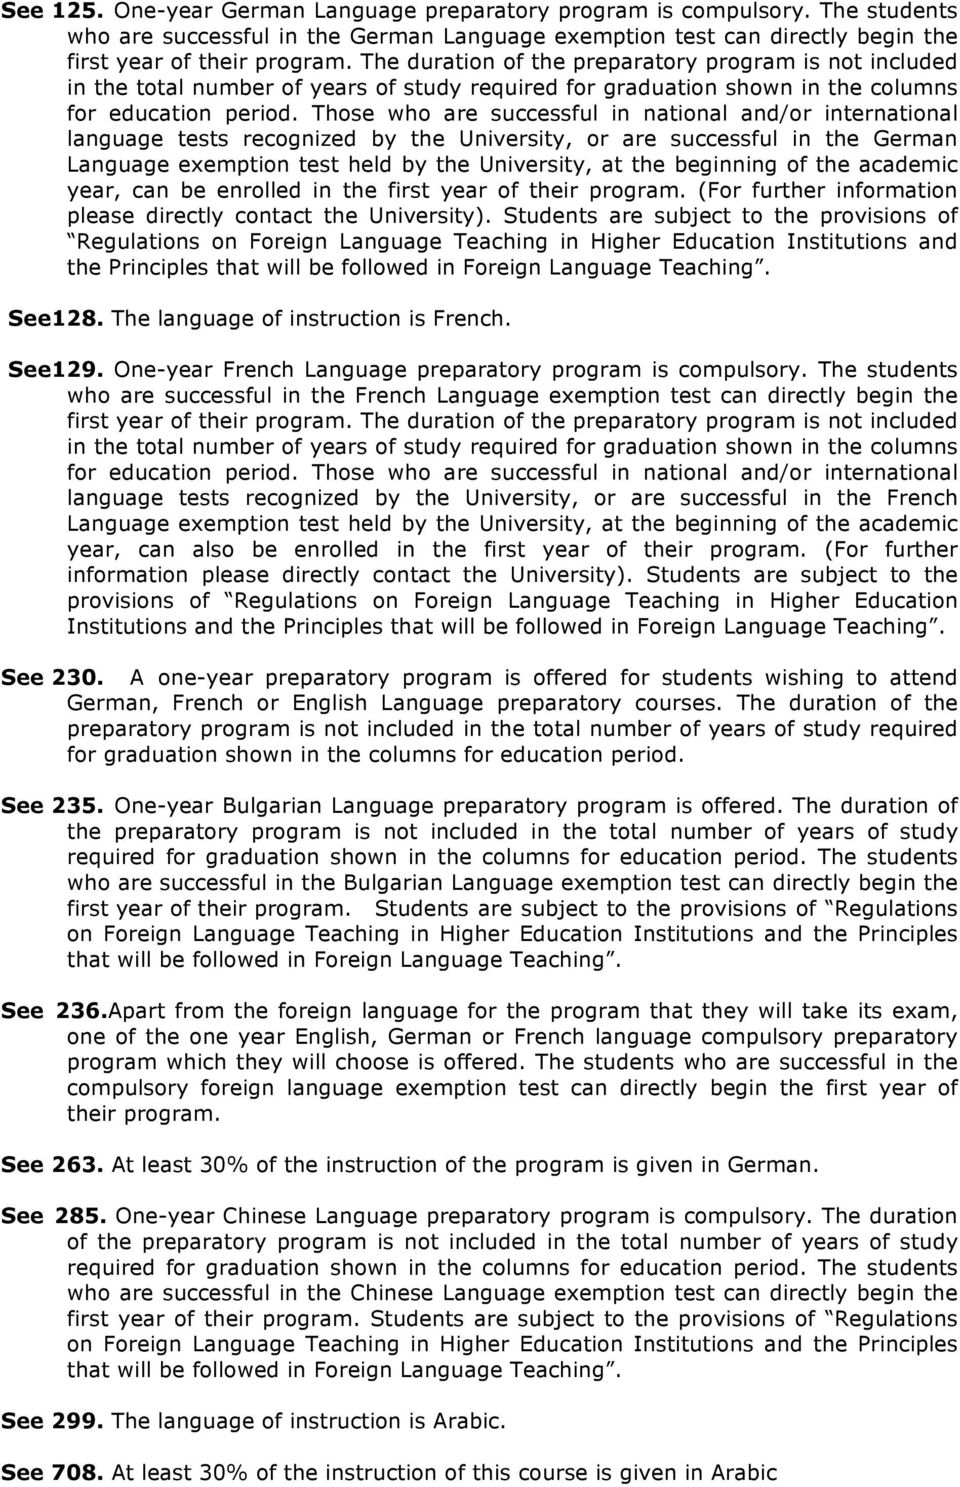 Those who are successful in national and/or international language tests recognized by the University, or are successful in the German Language exemption test held by the University, at the beginning